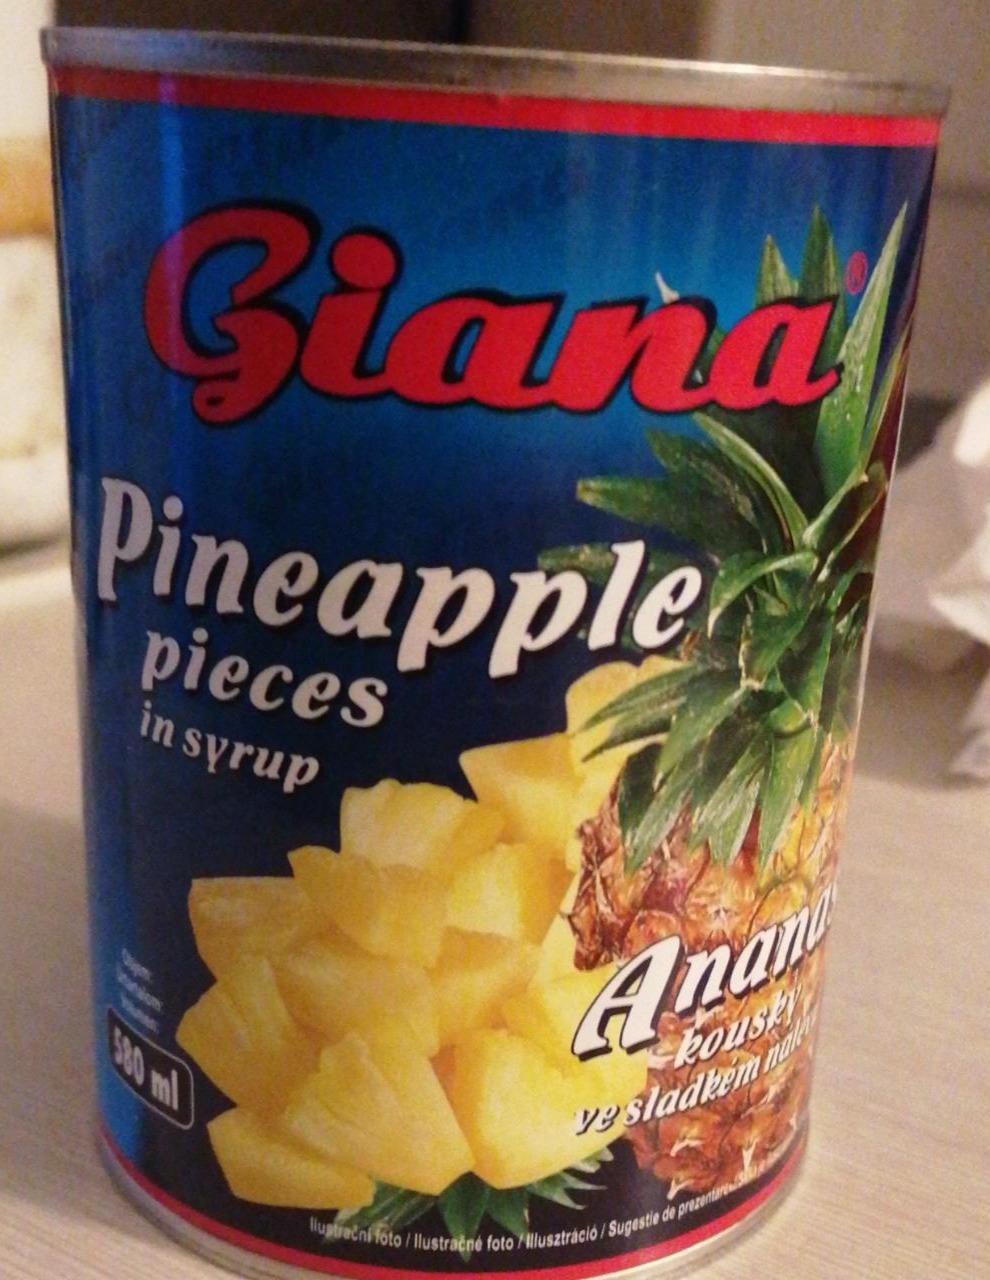 Fotografie - Pineapple pieces in syrup Giana